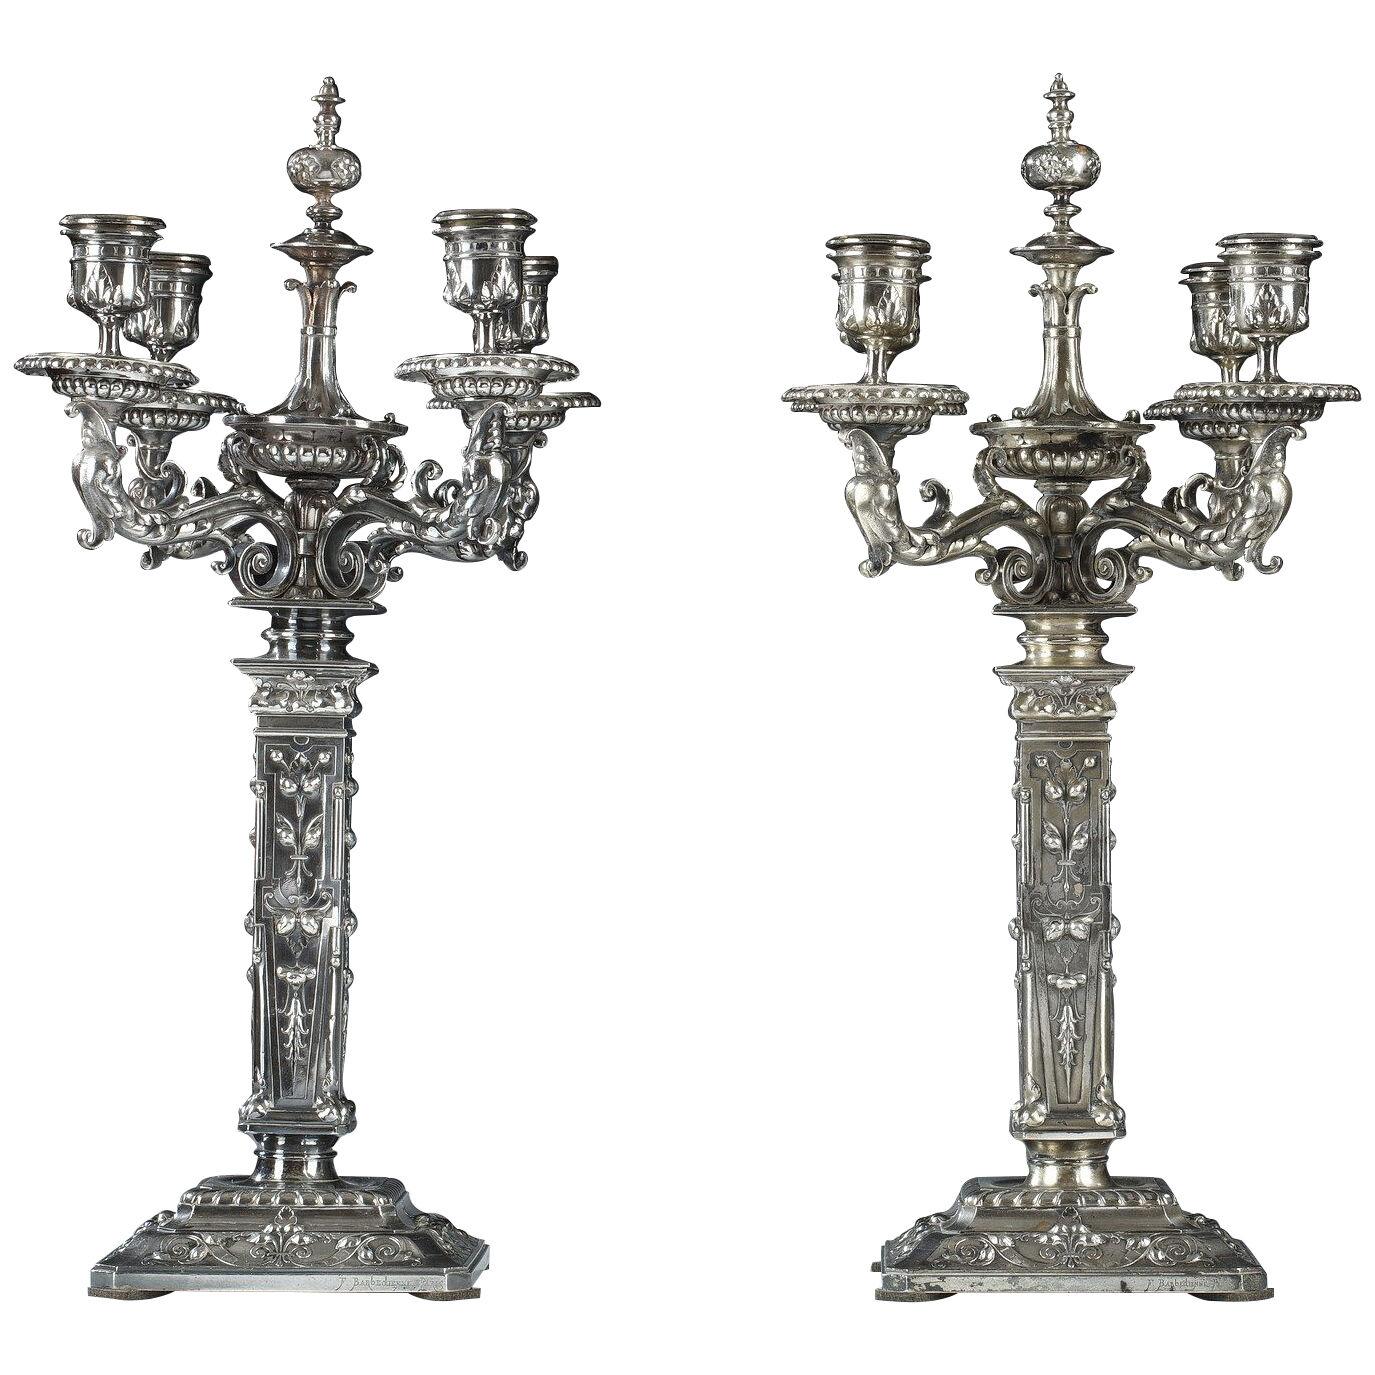 Pair of Renaissance Style Candelabra by F. Barbedienne, France, 1869